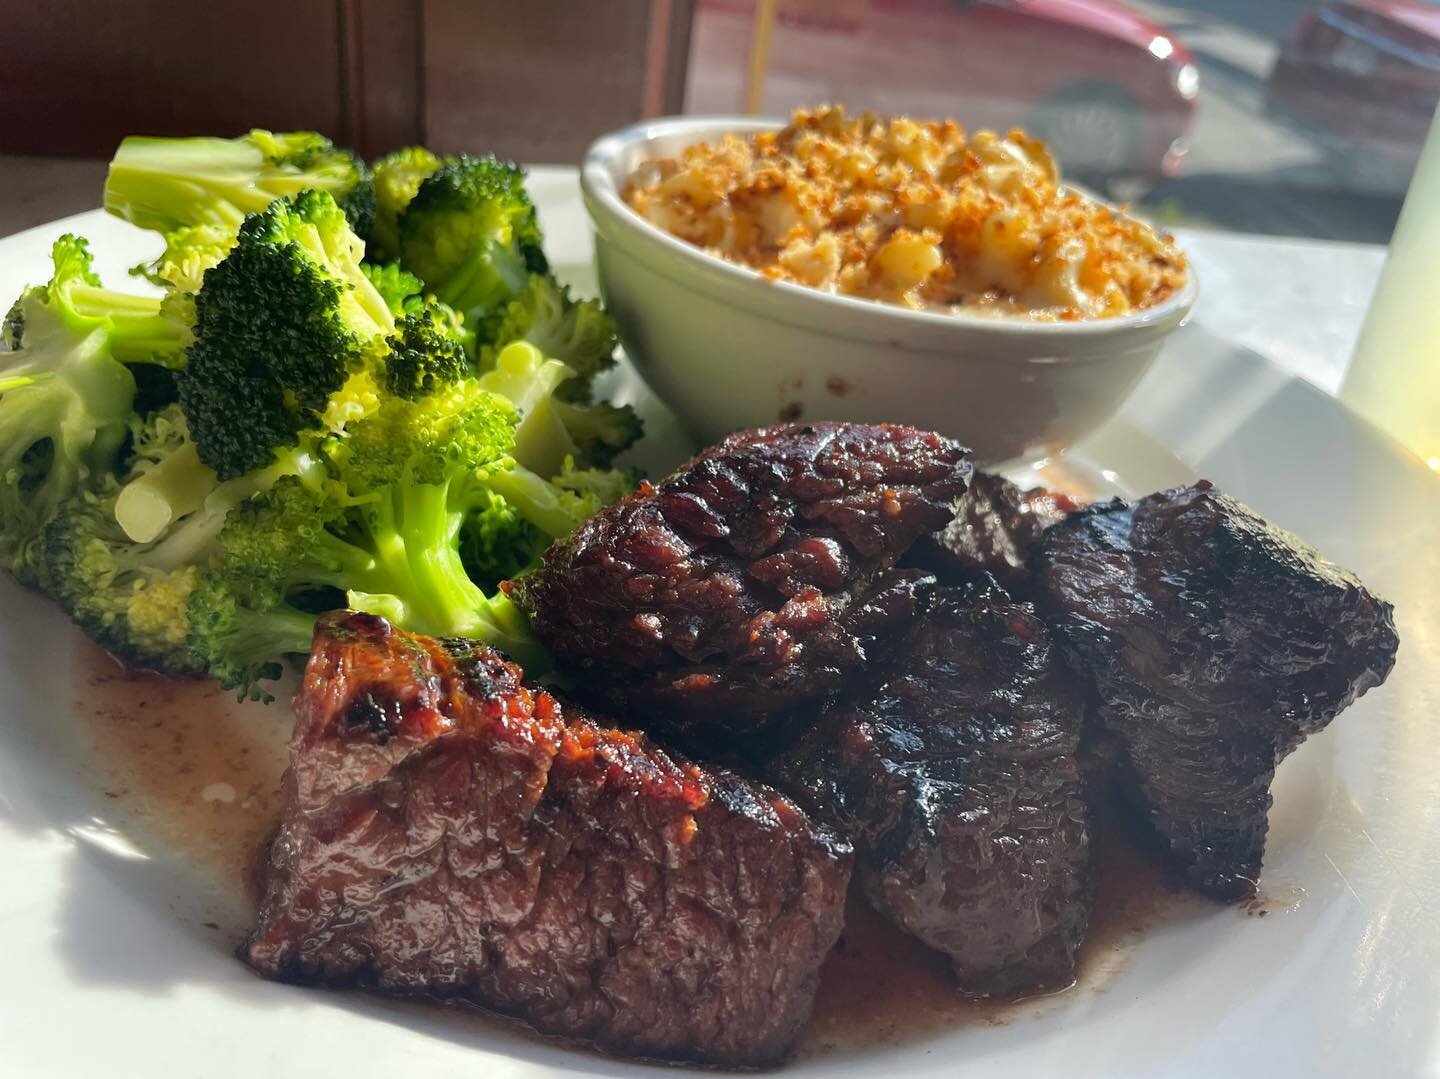 Our deliciously marinated steak tips pairs perfectly with homemade mac &amp; cheese! What&rsquo;s your favorite side?
.
.
.
.
.
.
#BostonRestaurant #BostonBar #SouthieBar #SteakTips #Dinner #BostonFunctions  #Homemade #Dinner #chef #Meat #MeetingSpac